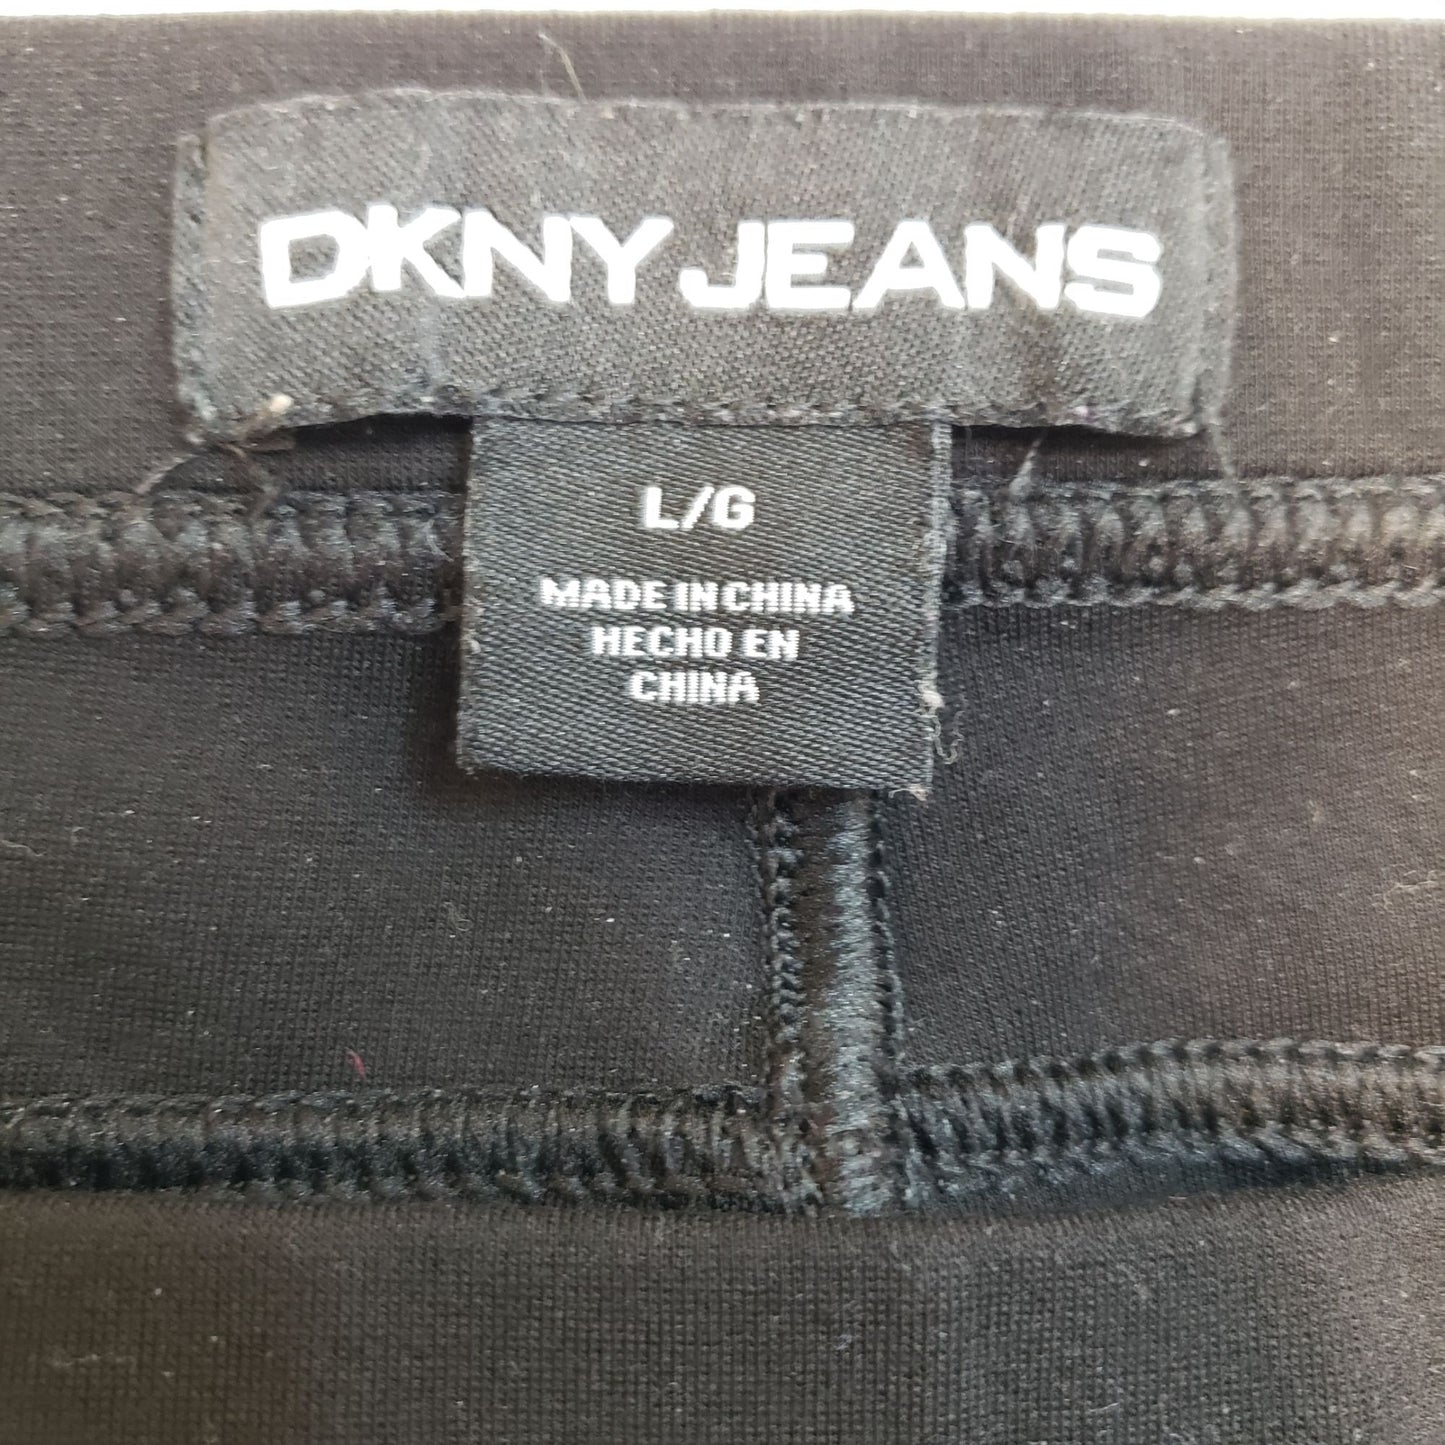 DKNY Jeans Pull-On Jeggings with Faux Leather Trim Size Large